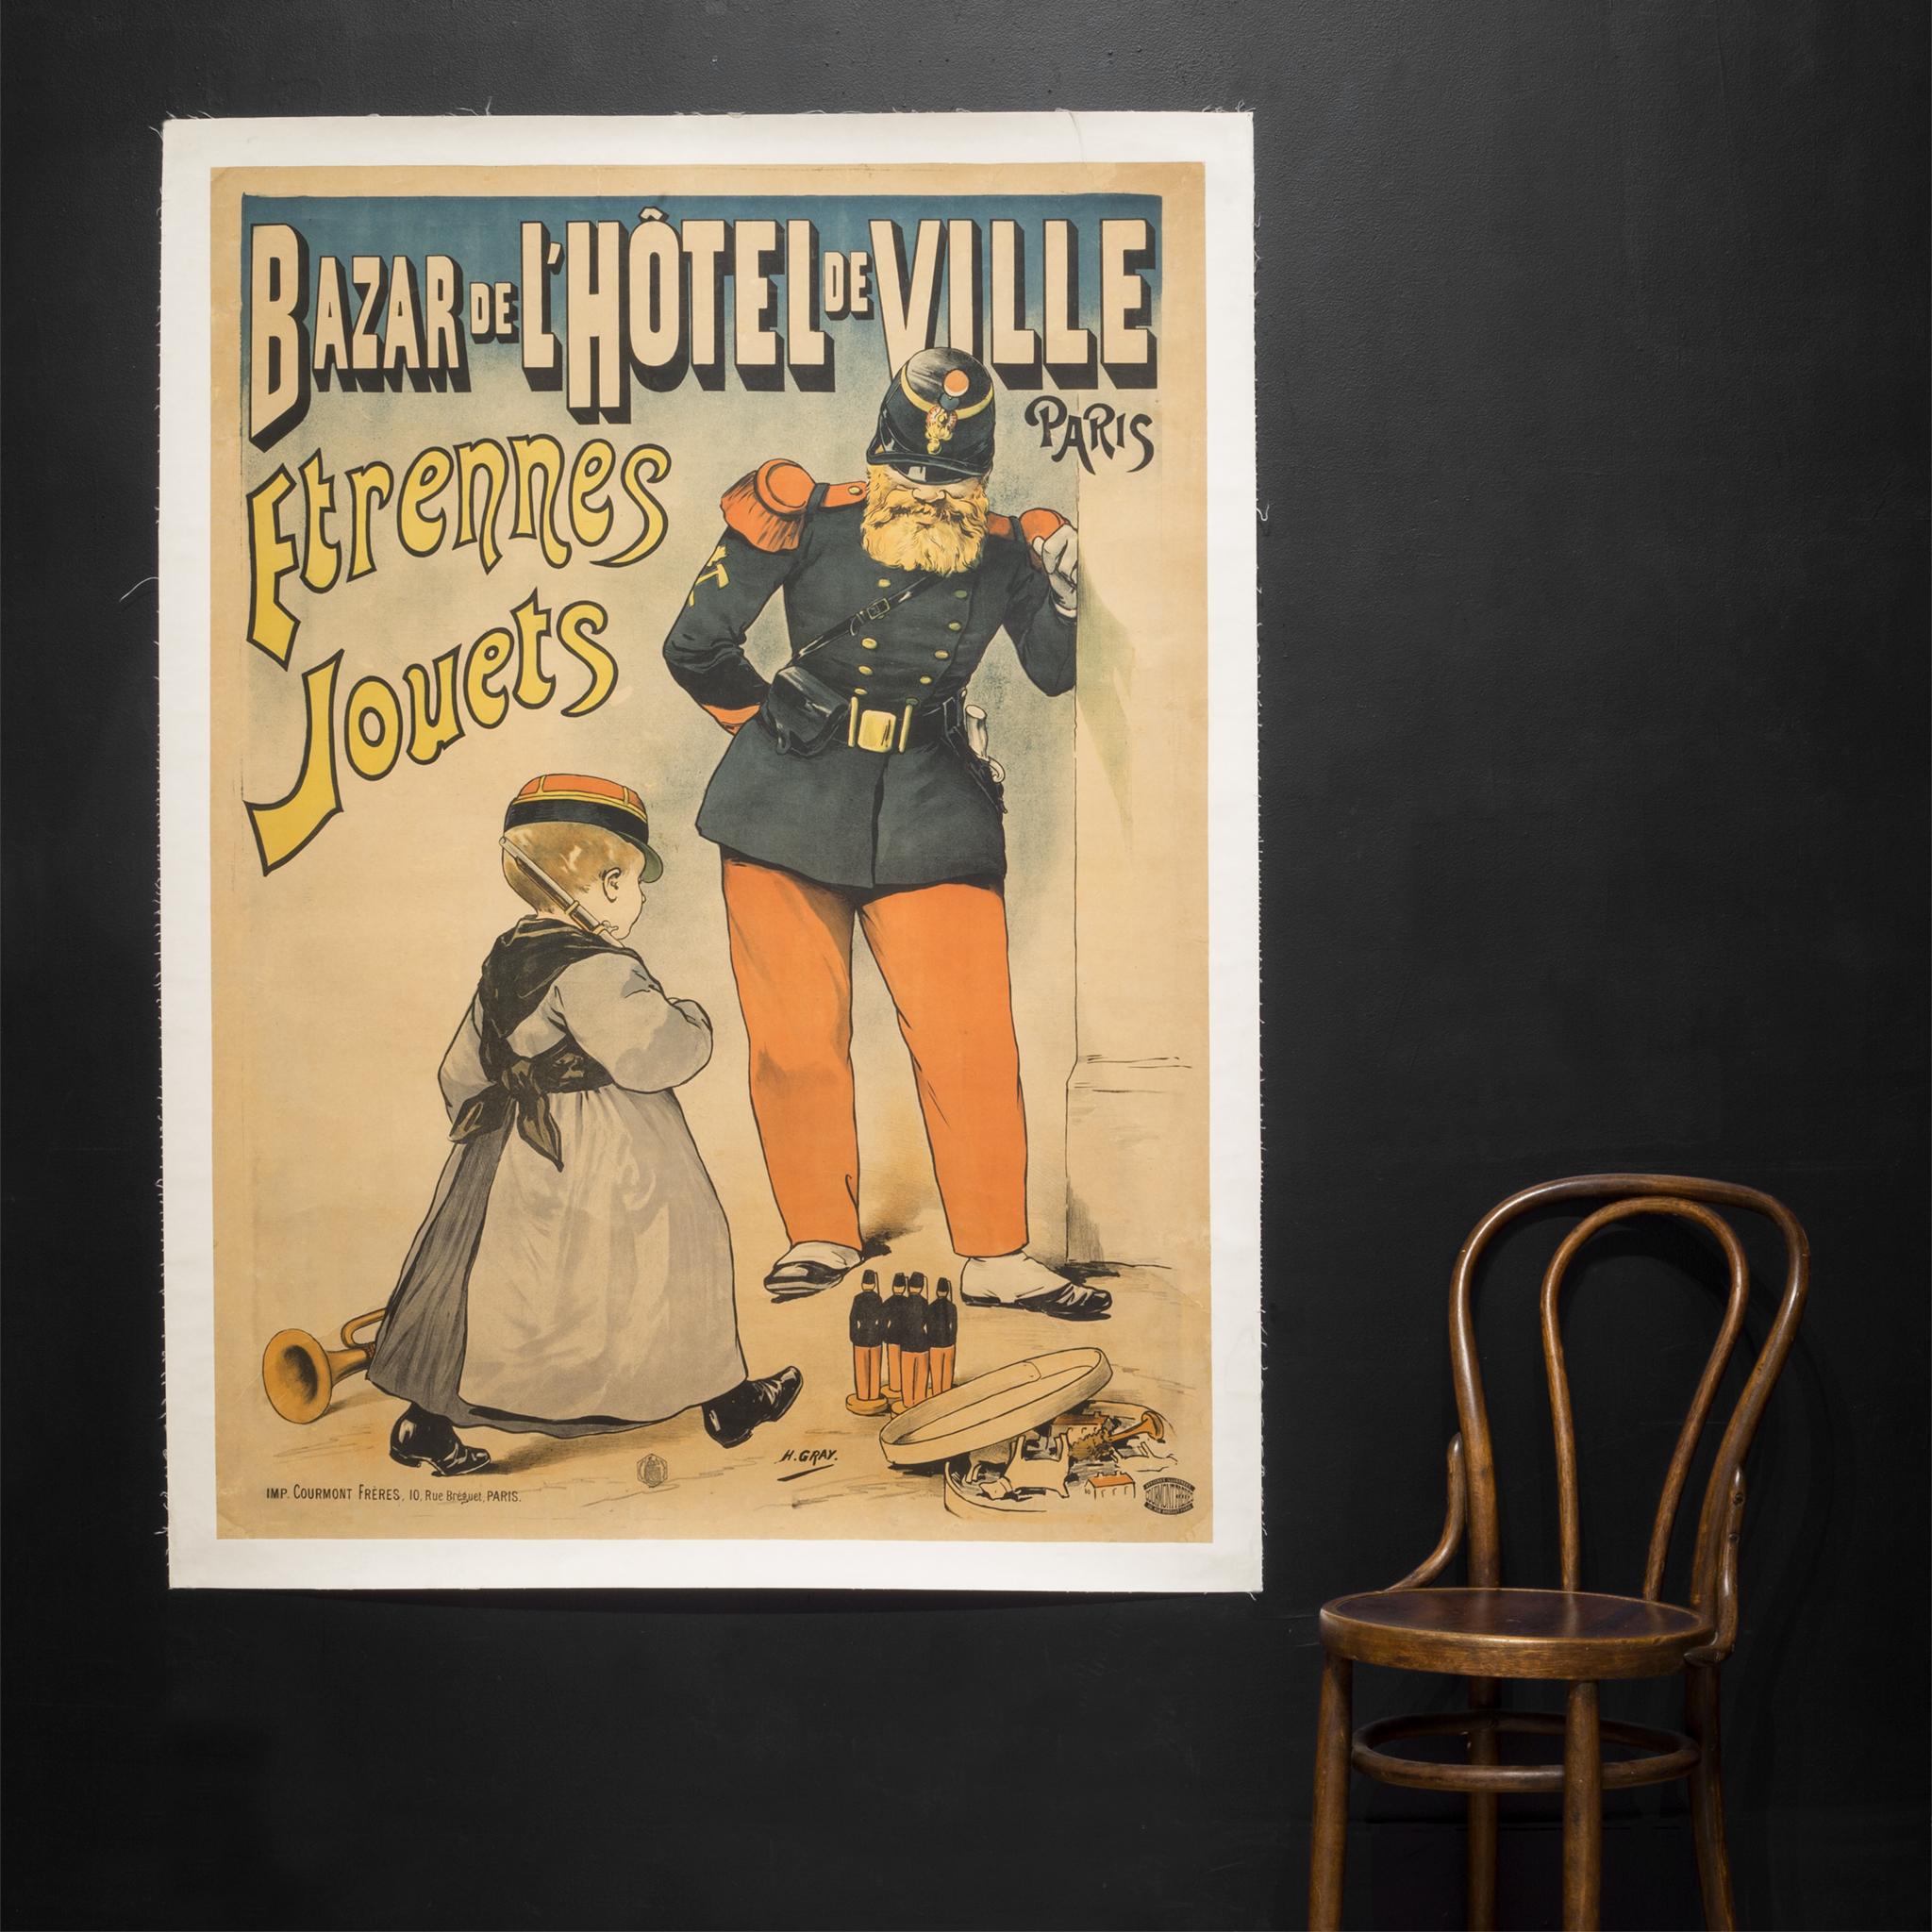 About

This is an original vintage lithograph poster depicting the sale of toys and New Year?s gifts at the Bazar of the City Hall of Paris. This poster is not a reproduction. It is conservation mounted, linen backed, and in excellent